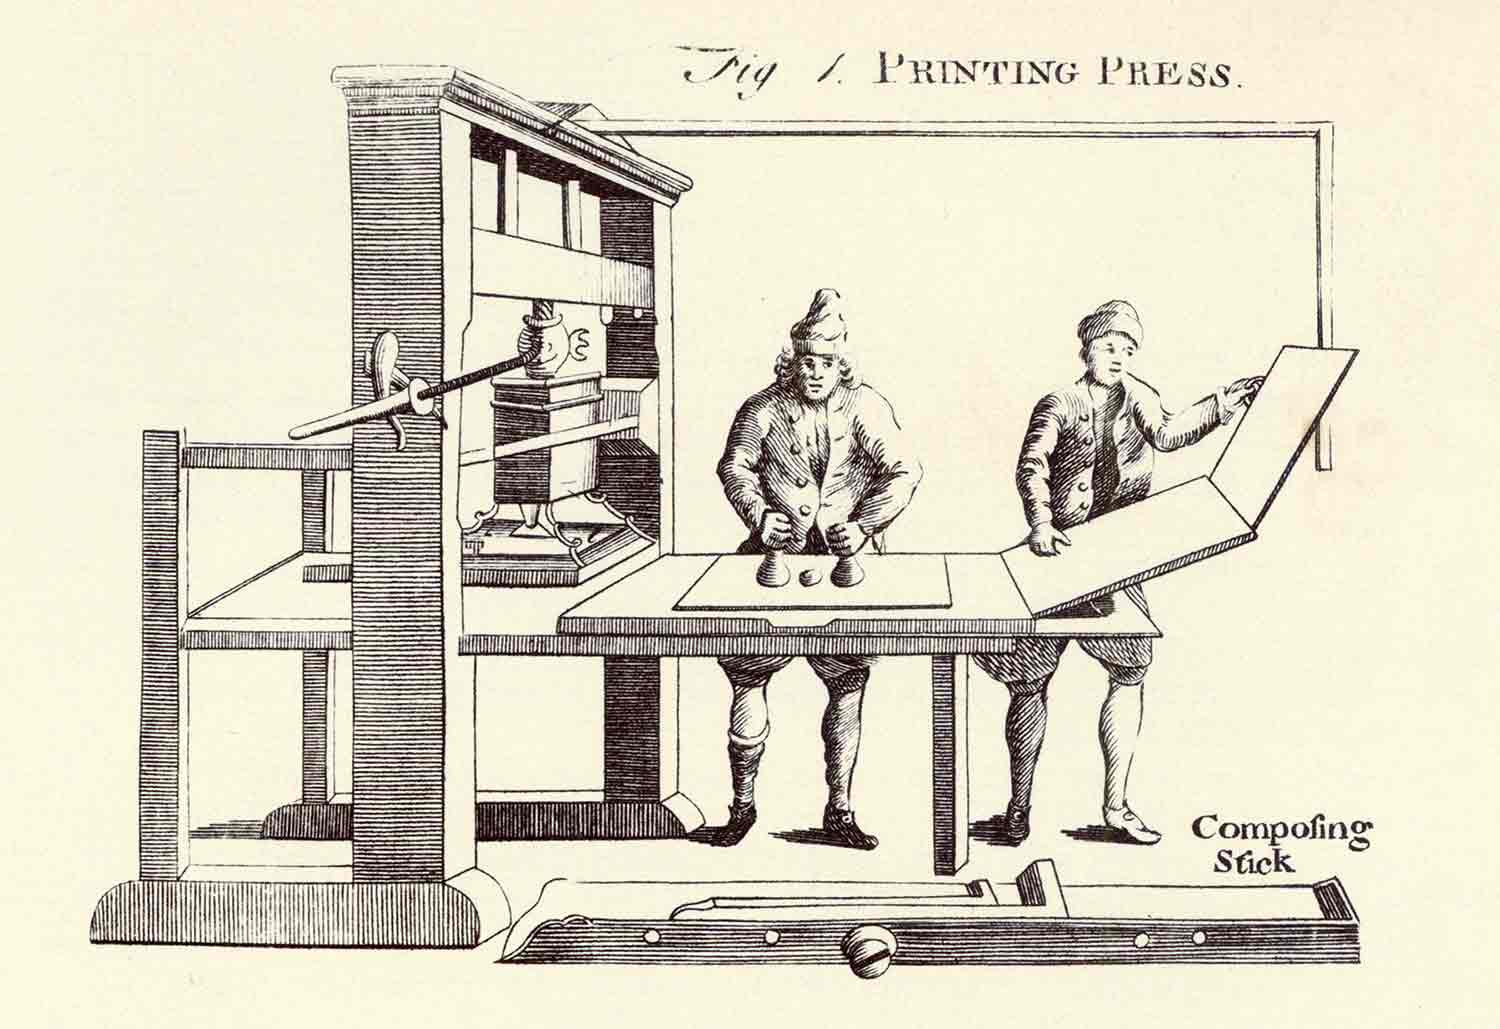 Two workers standing at a large printing press